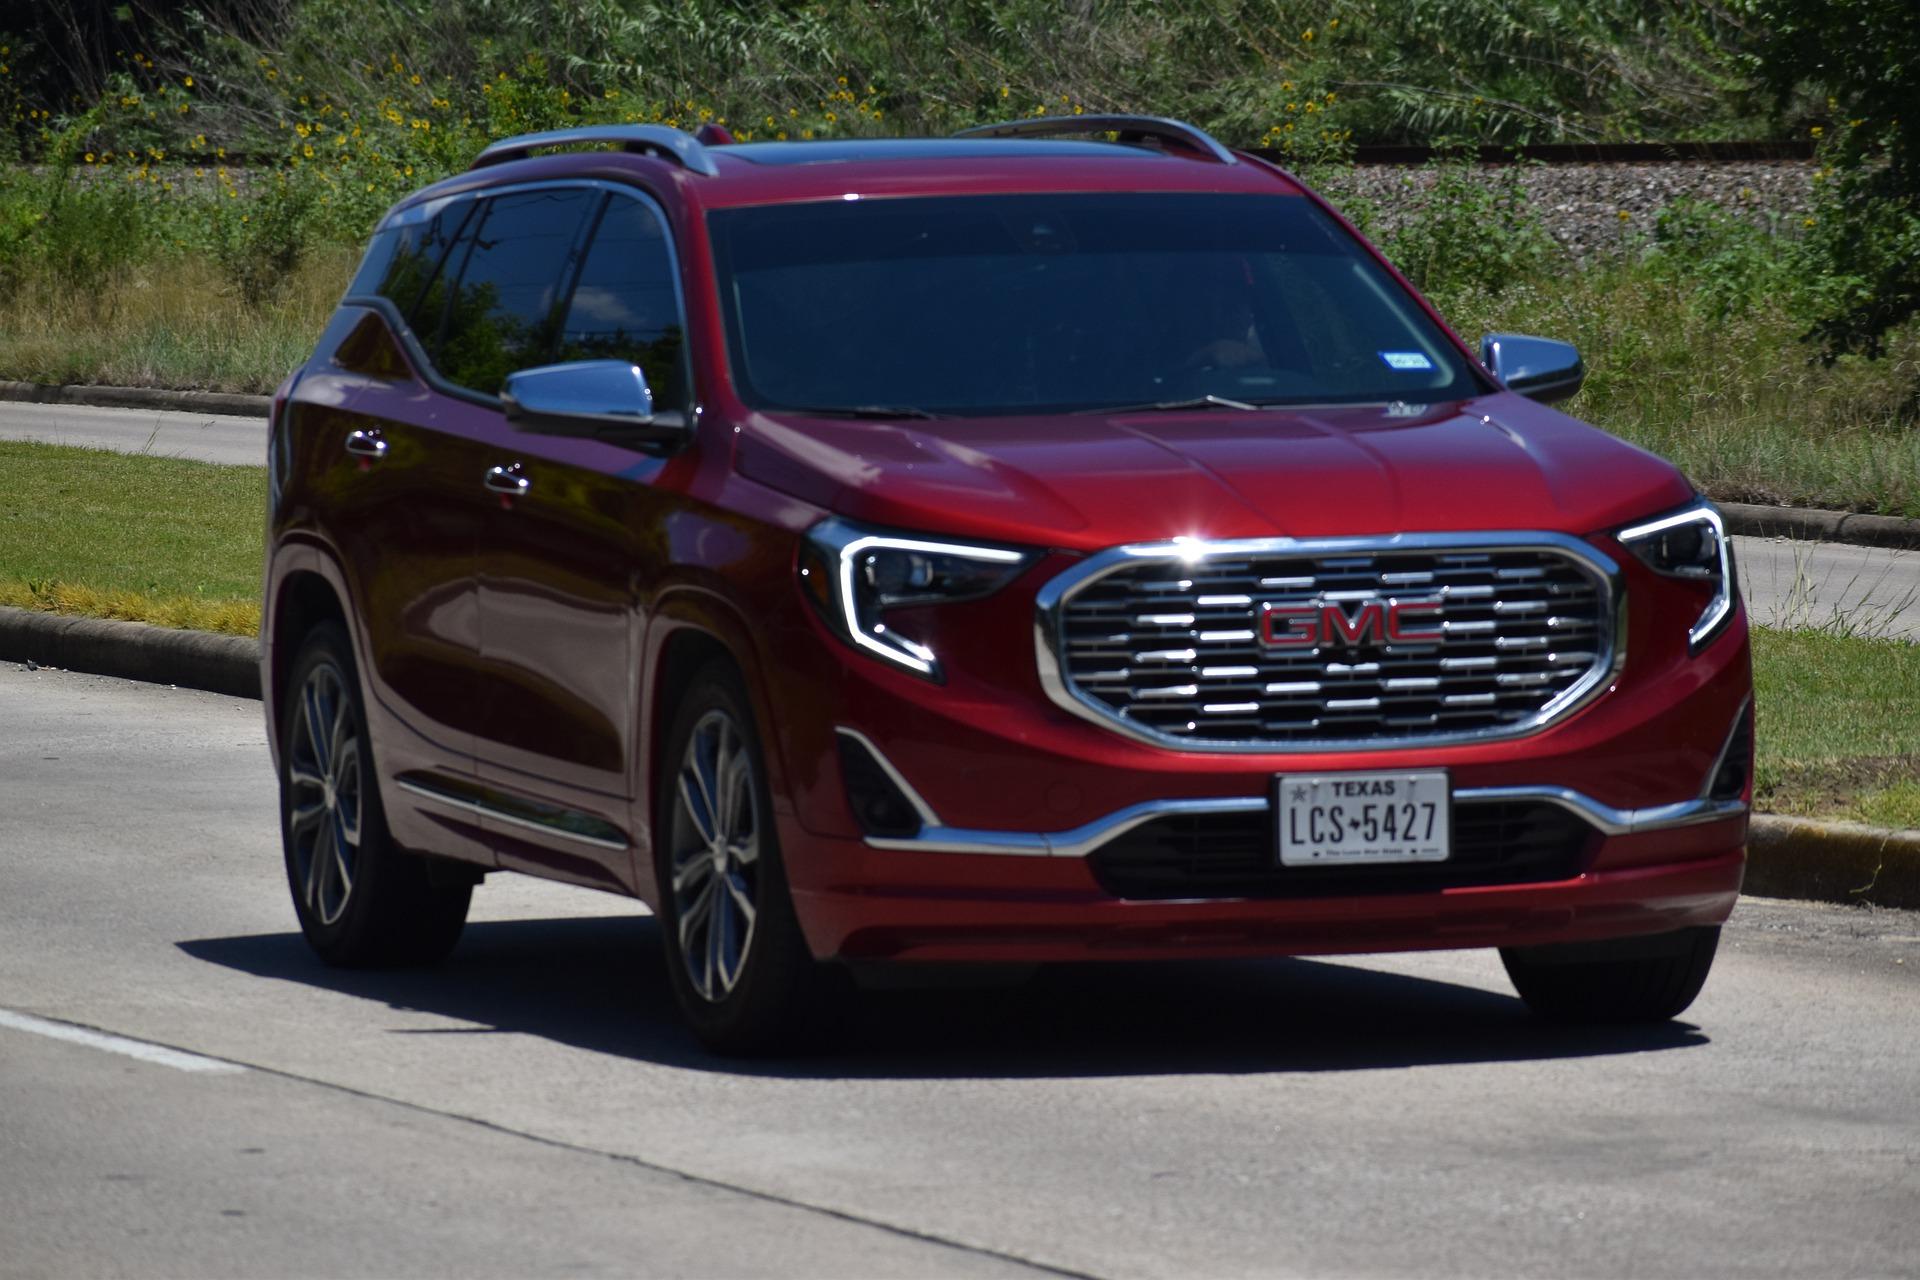 The GMC Acadia has had some dependable model years, but beware of the bad ones.